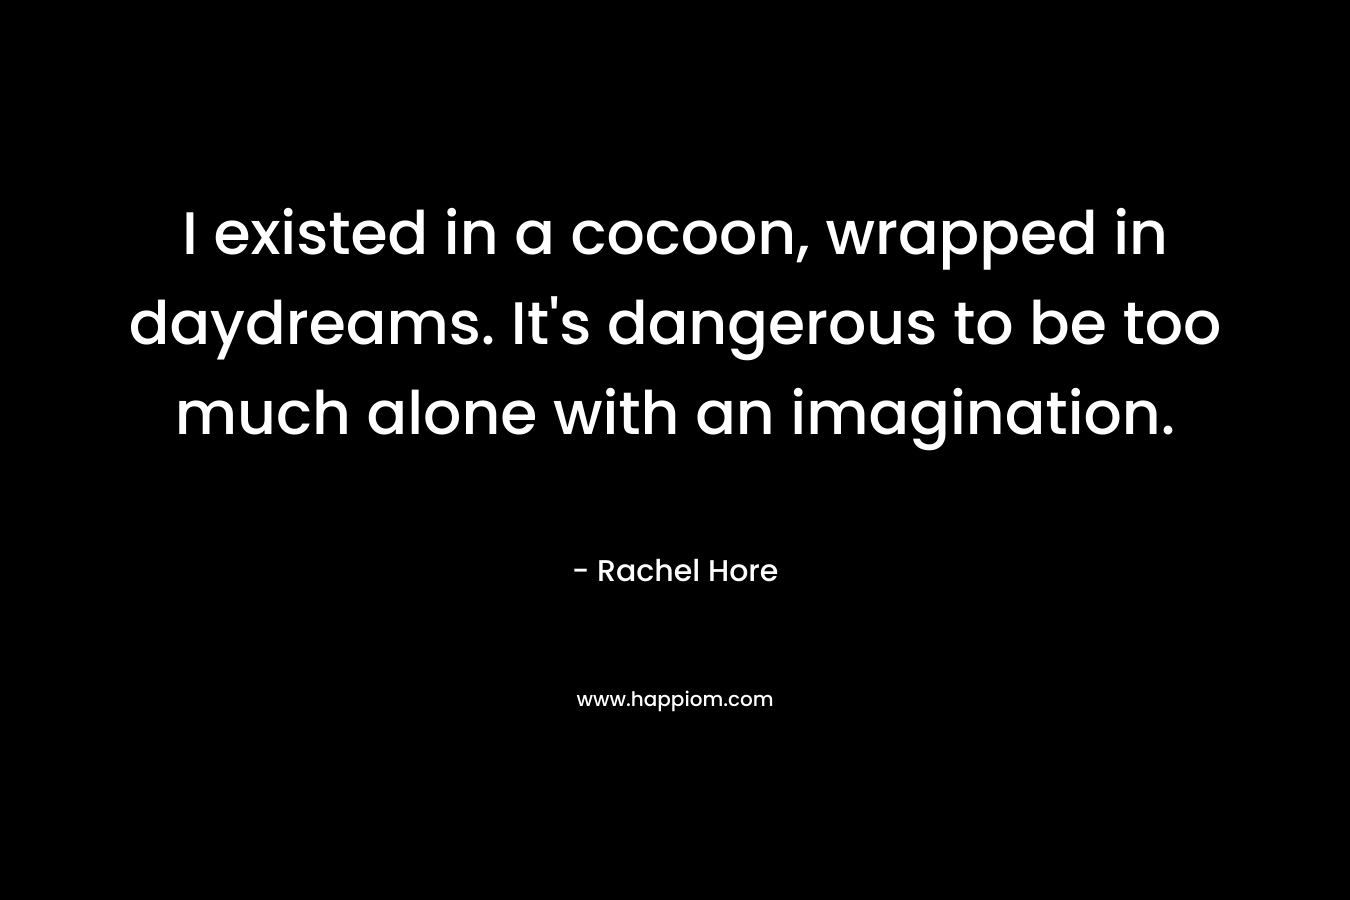 I existed in a cocoon, wrapped in daydreams. It’s dangerous to be too much alone with an imagination. – Rachel Hore